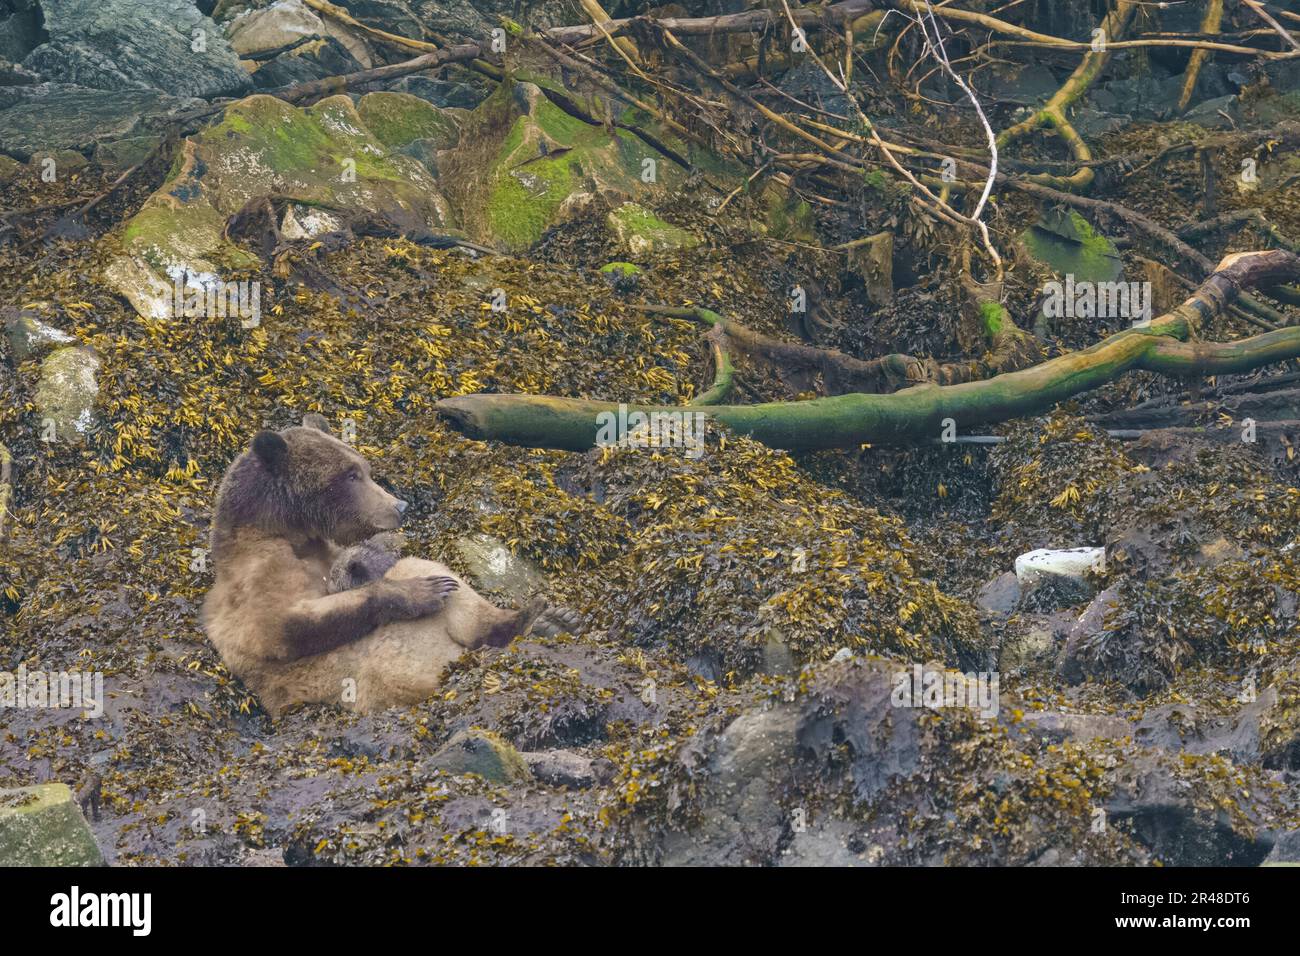 Grizzly bear mom nursing her two about 3-4 month old cubs (coy) in Knight Inlet, First Nations Territory, Traditional Territories of the Kwakwaka'wakw Stock Photo